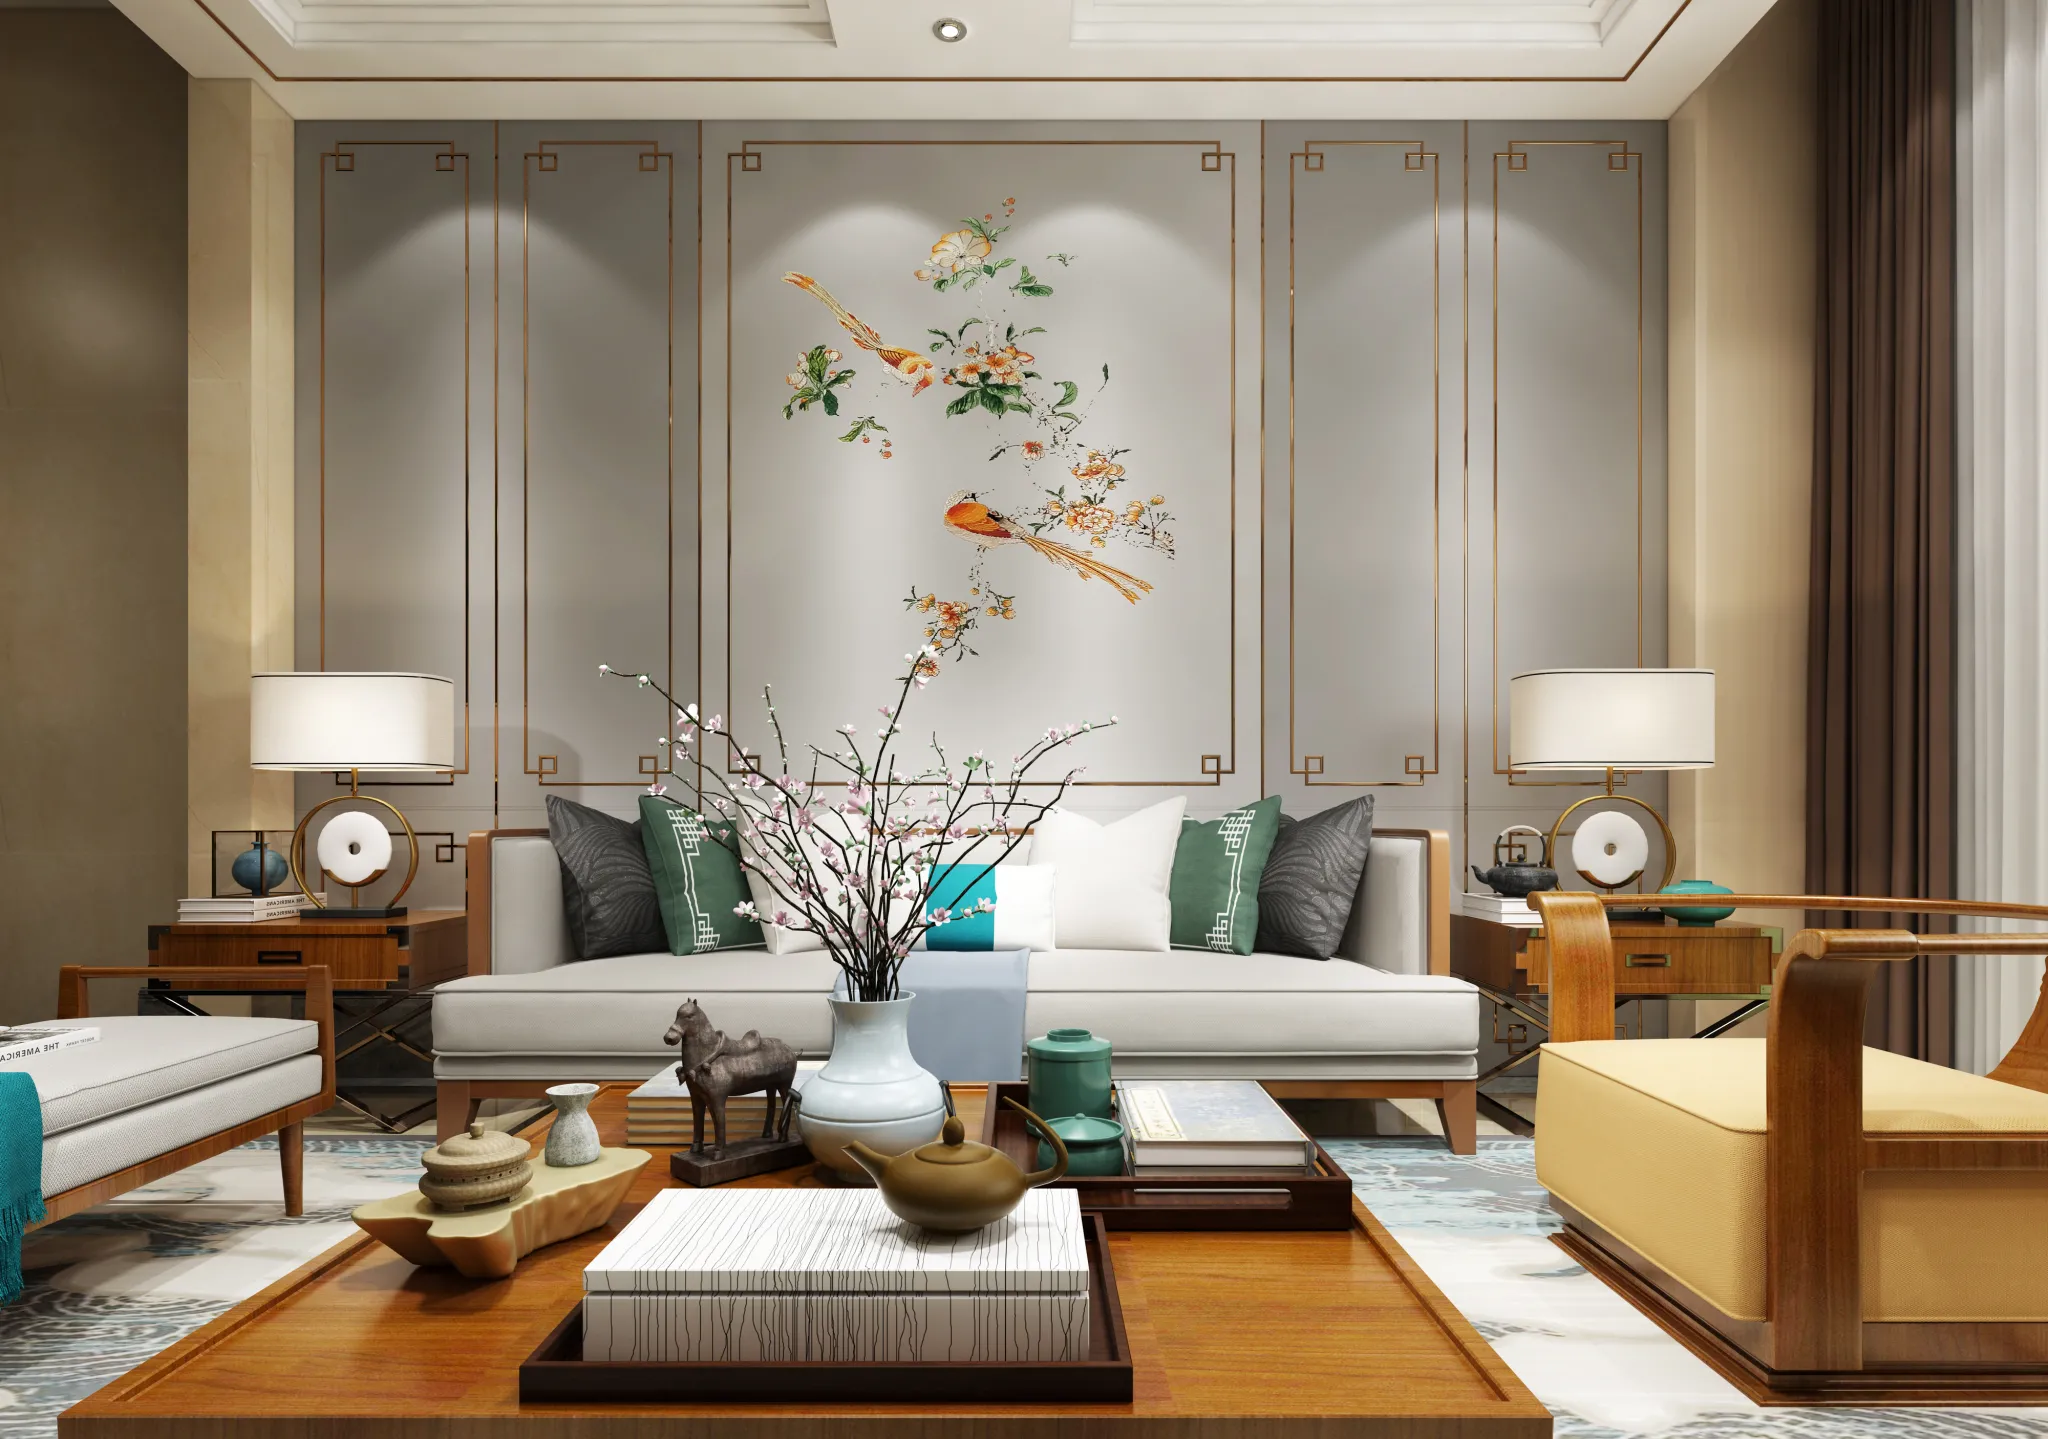 DESMOD INTERIOR 2021 (VRAY) – 4. LIVING ROOM – CHINESE – 035